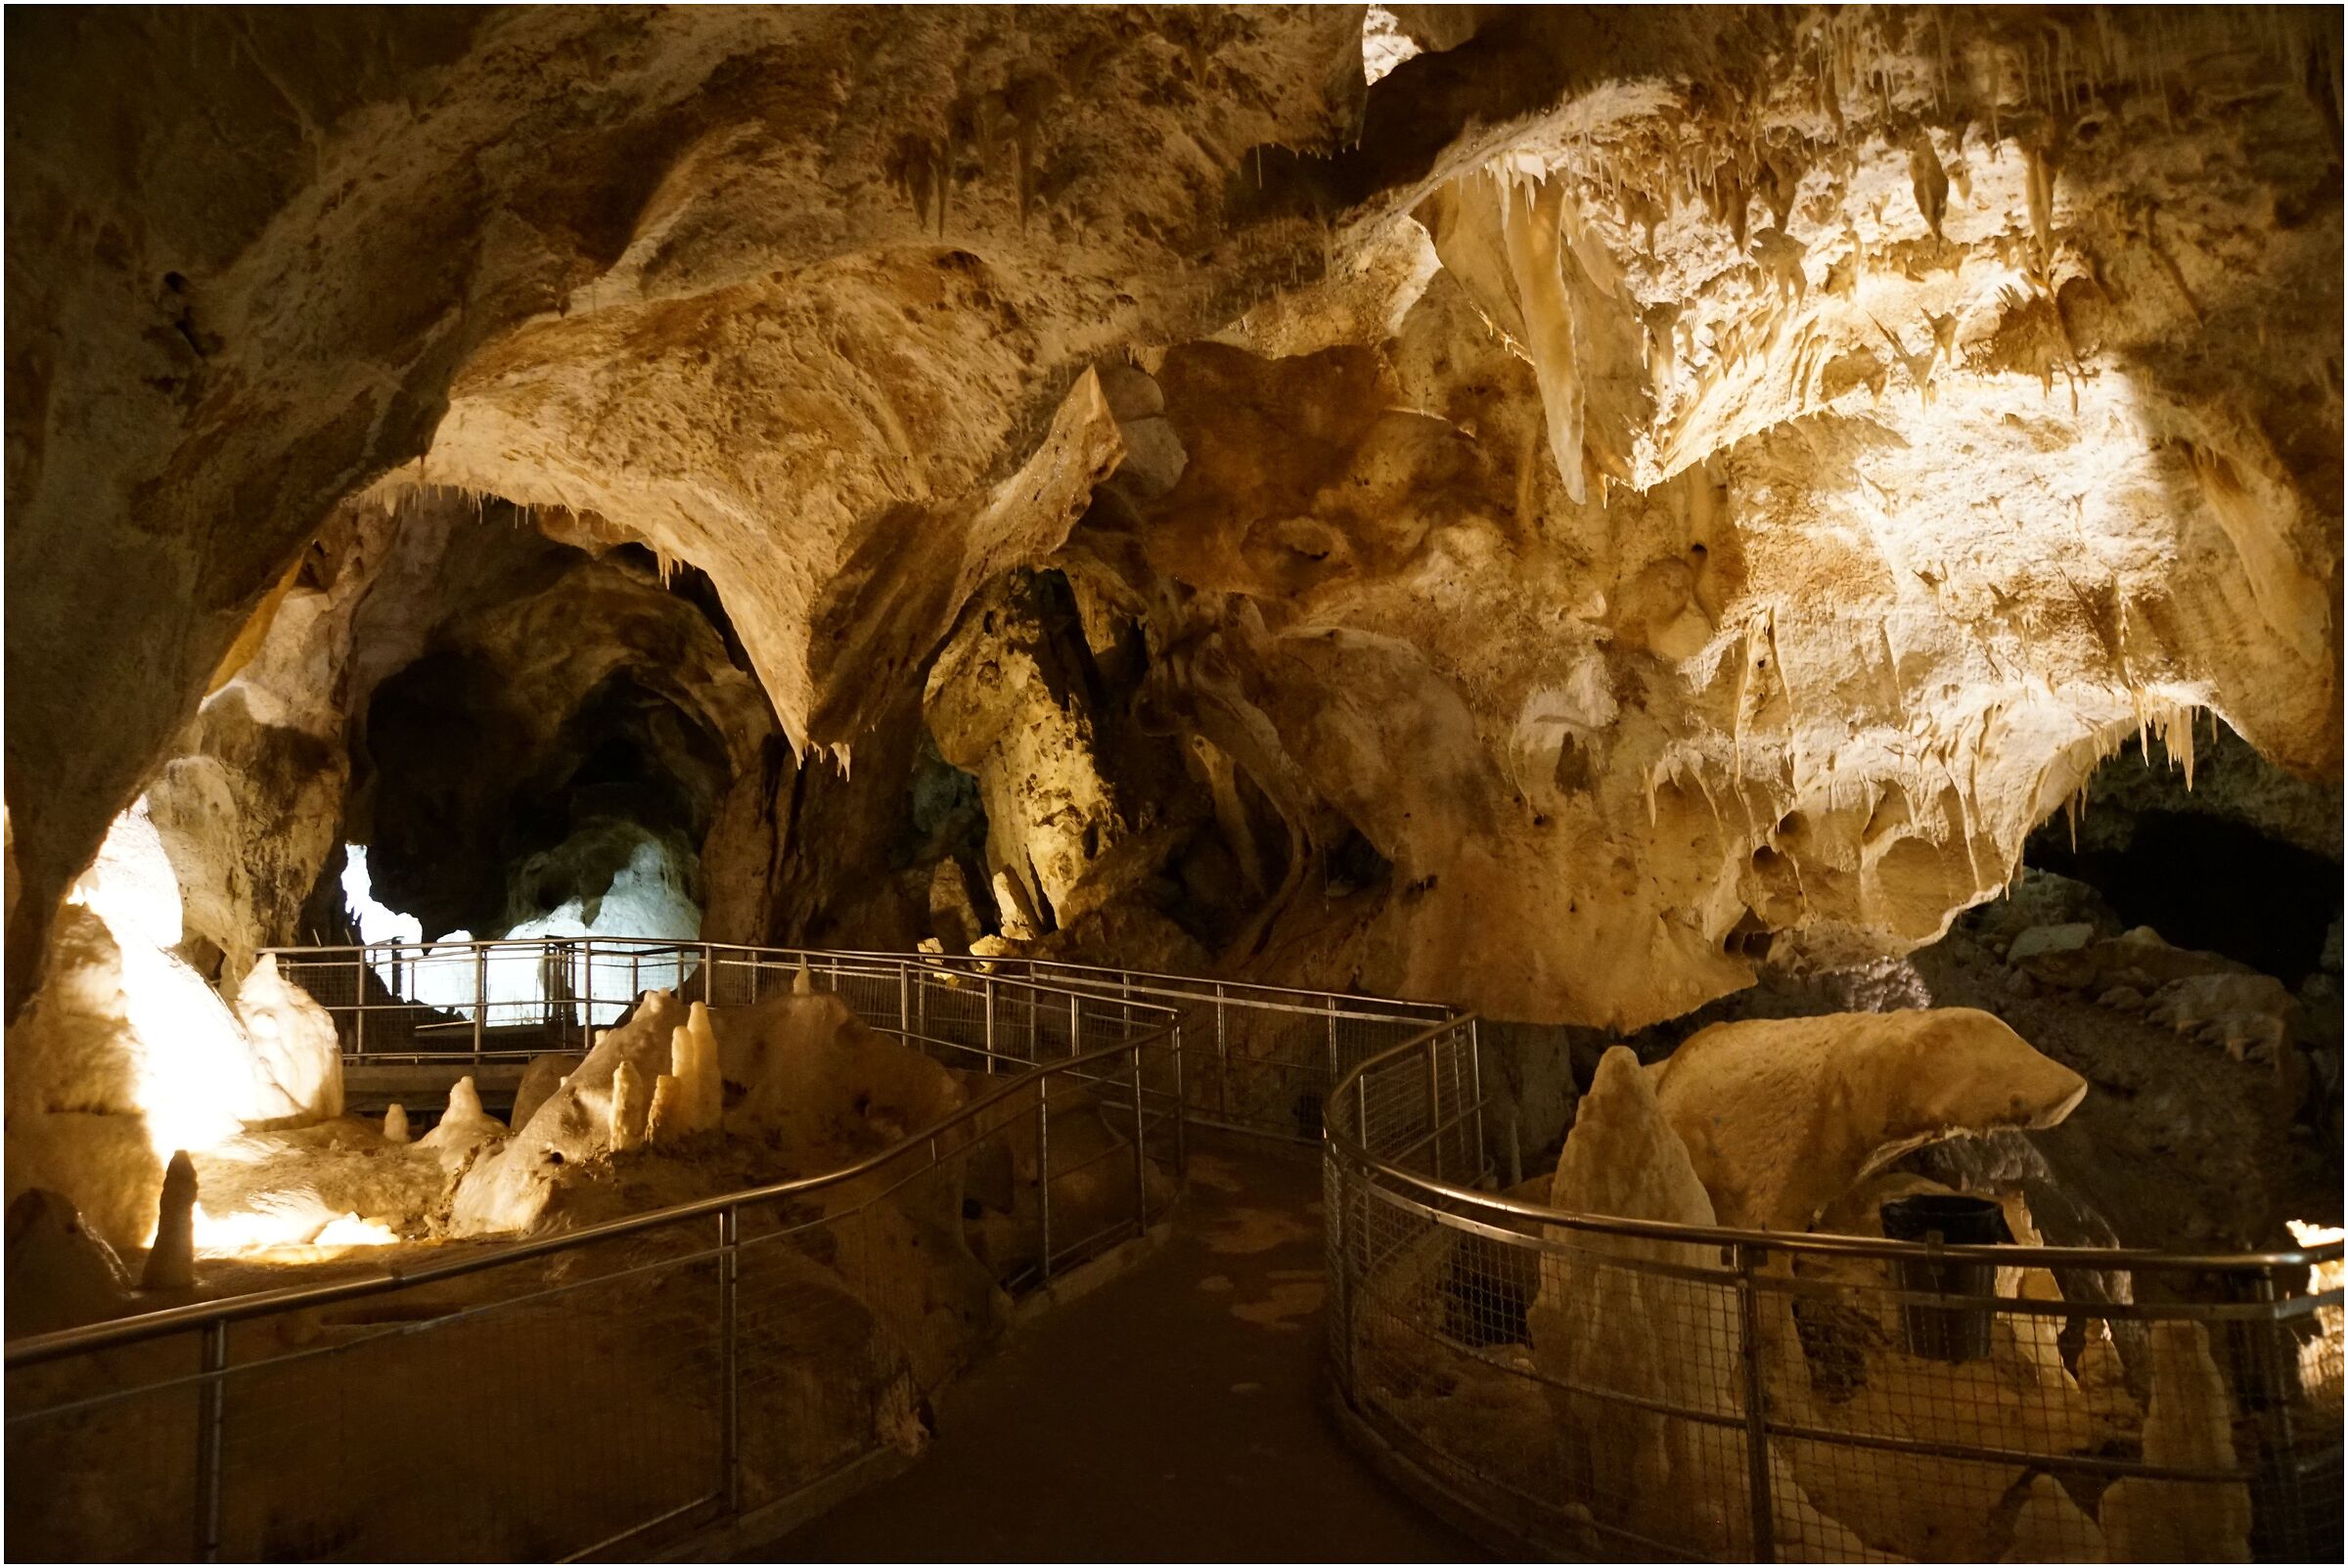 In the underworld of beauty (Frasassi Caves)...